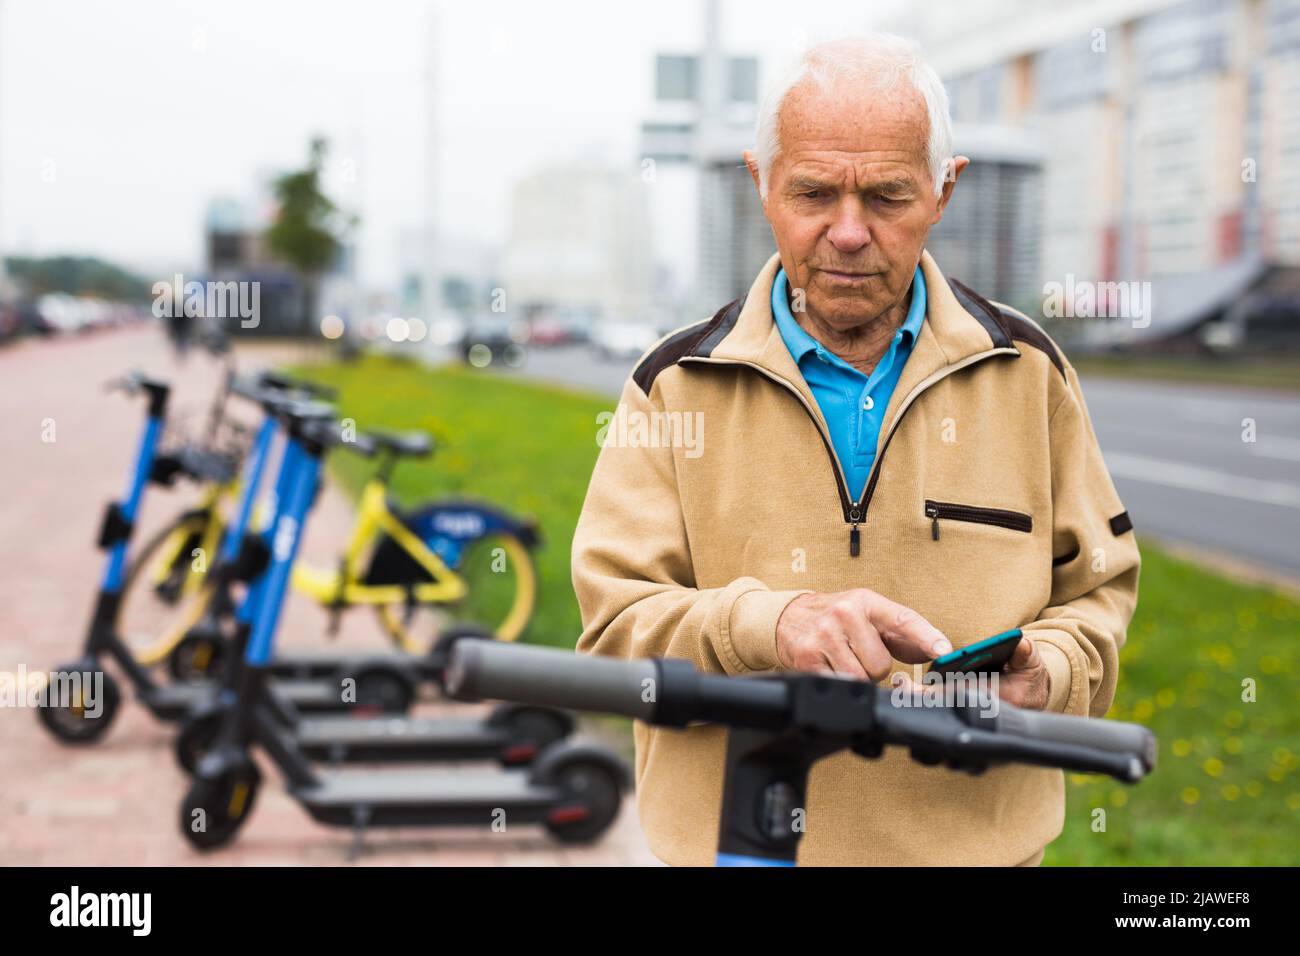 Old man using smartphone to activate e-scooter Stock Photo